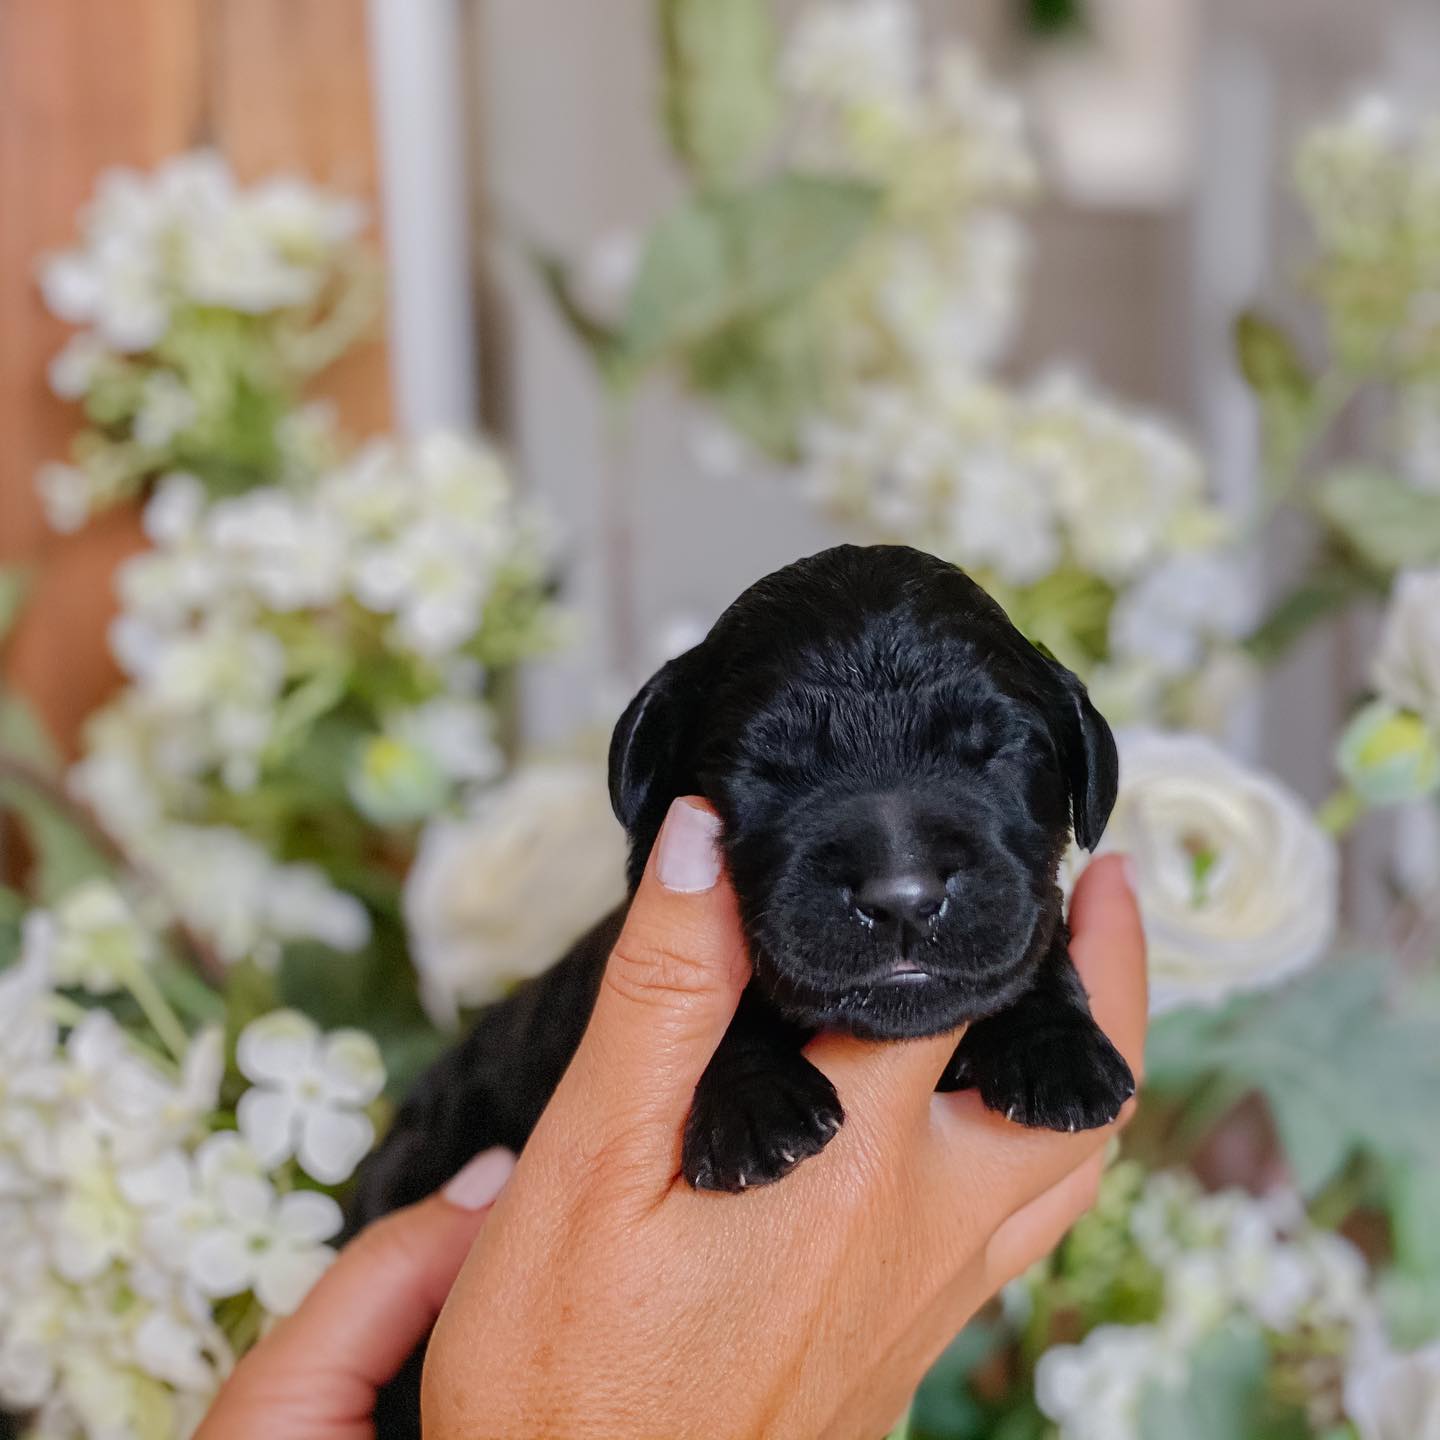 The black newborn goldendoodle puppy is so adorable with its soft fur and big eyes. It's hard to believe that this little ball of fluff will grow up to be a big, strong dog.